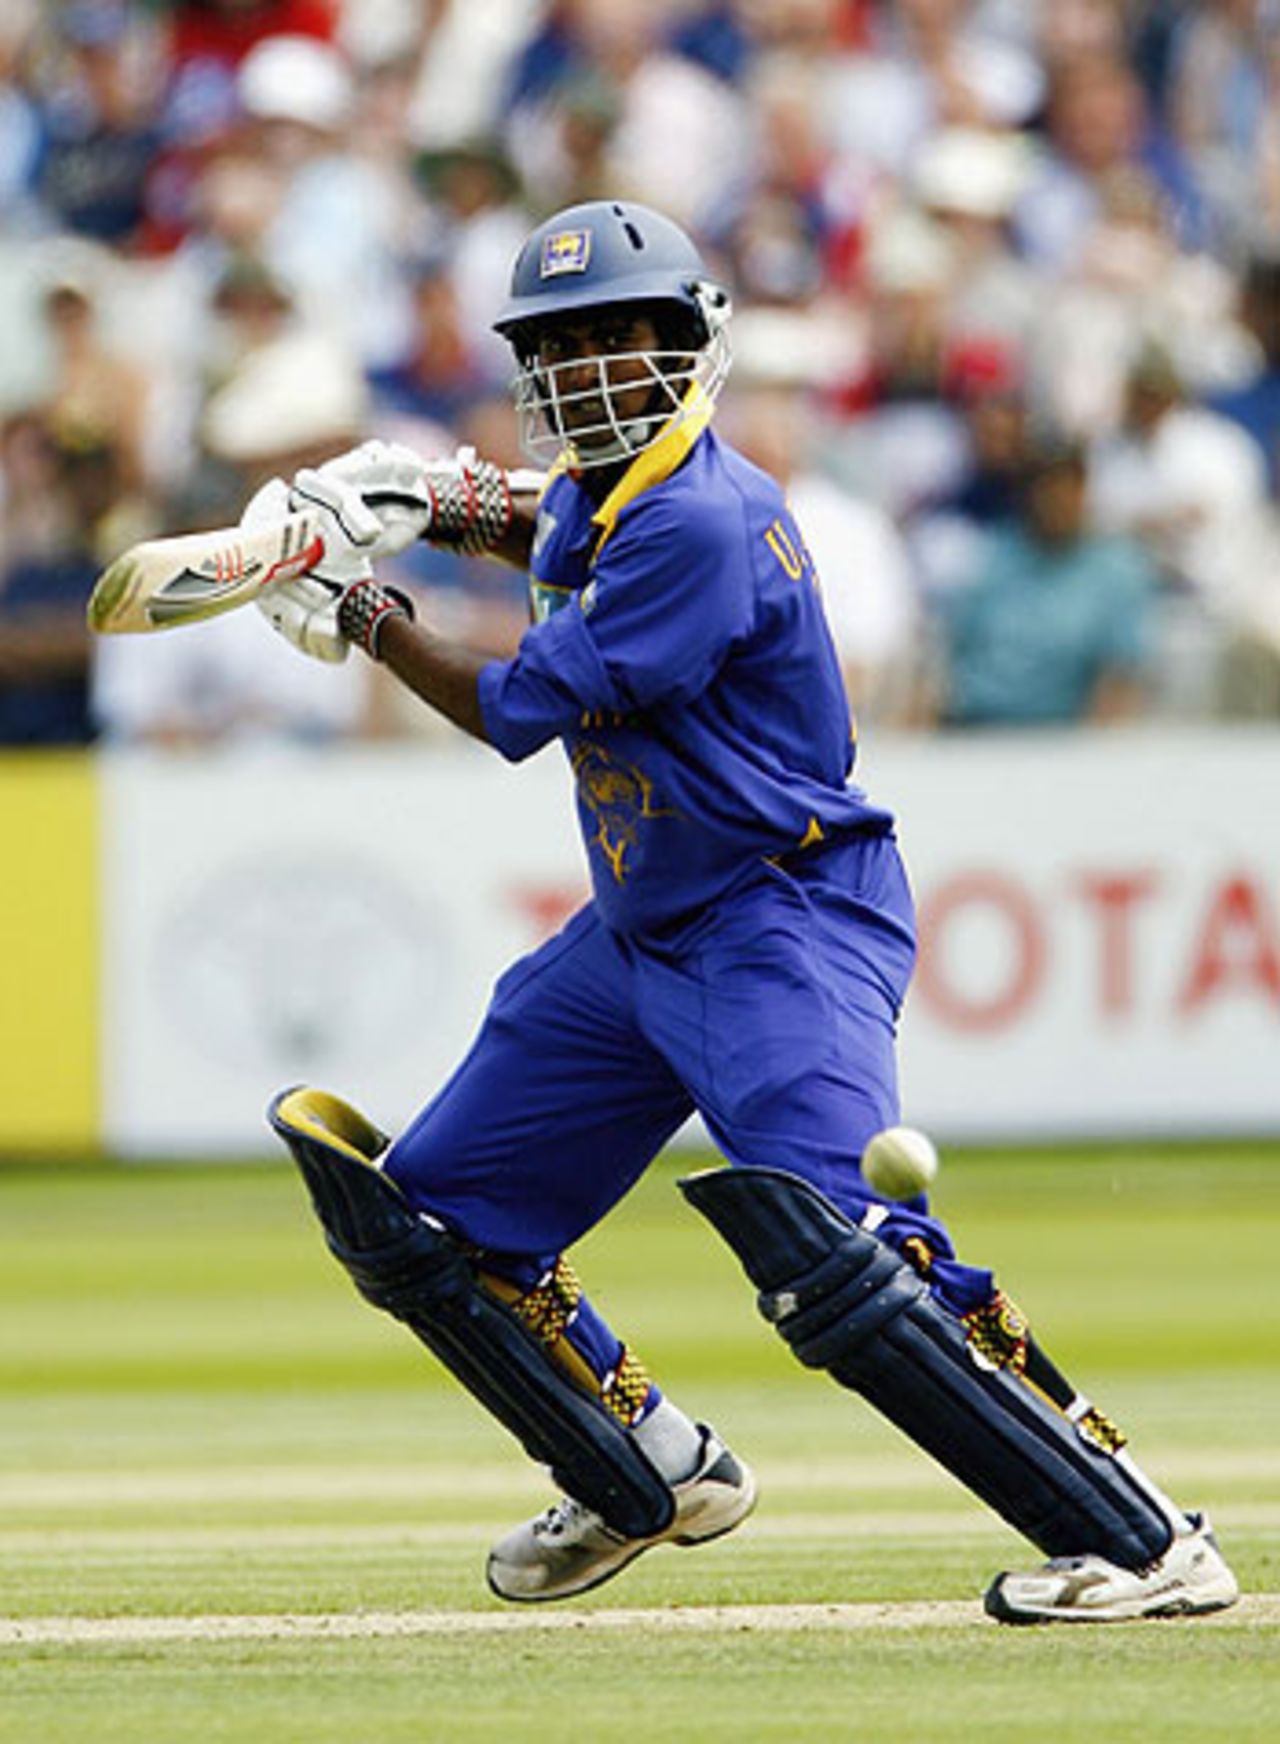 Upul Tharanga plays through the off side during his third one-day century, England v Sri Lanka, 1st ODI, Lord's, June 17, 2006